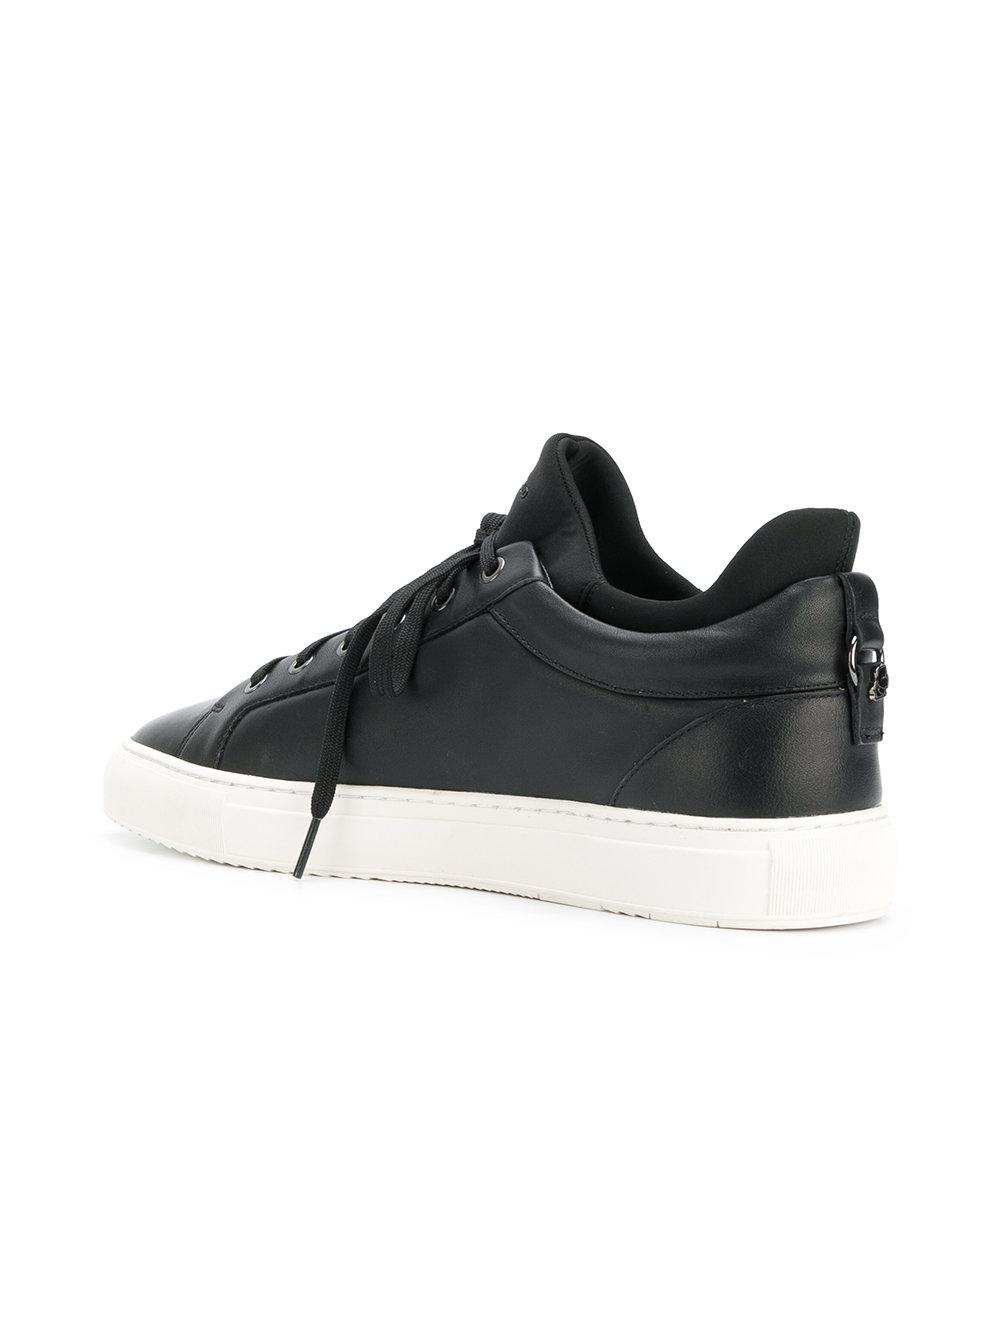 Karl Lagerfeld Leather Studded Sneakers in Black for Men - Lyst